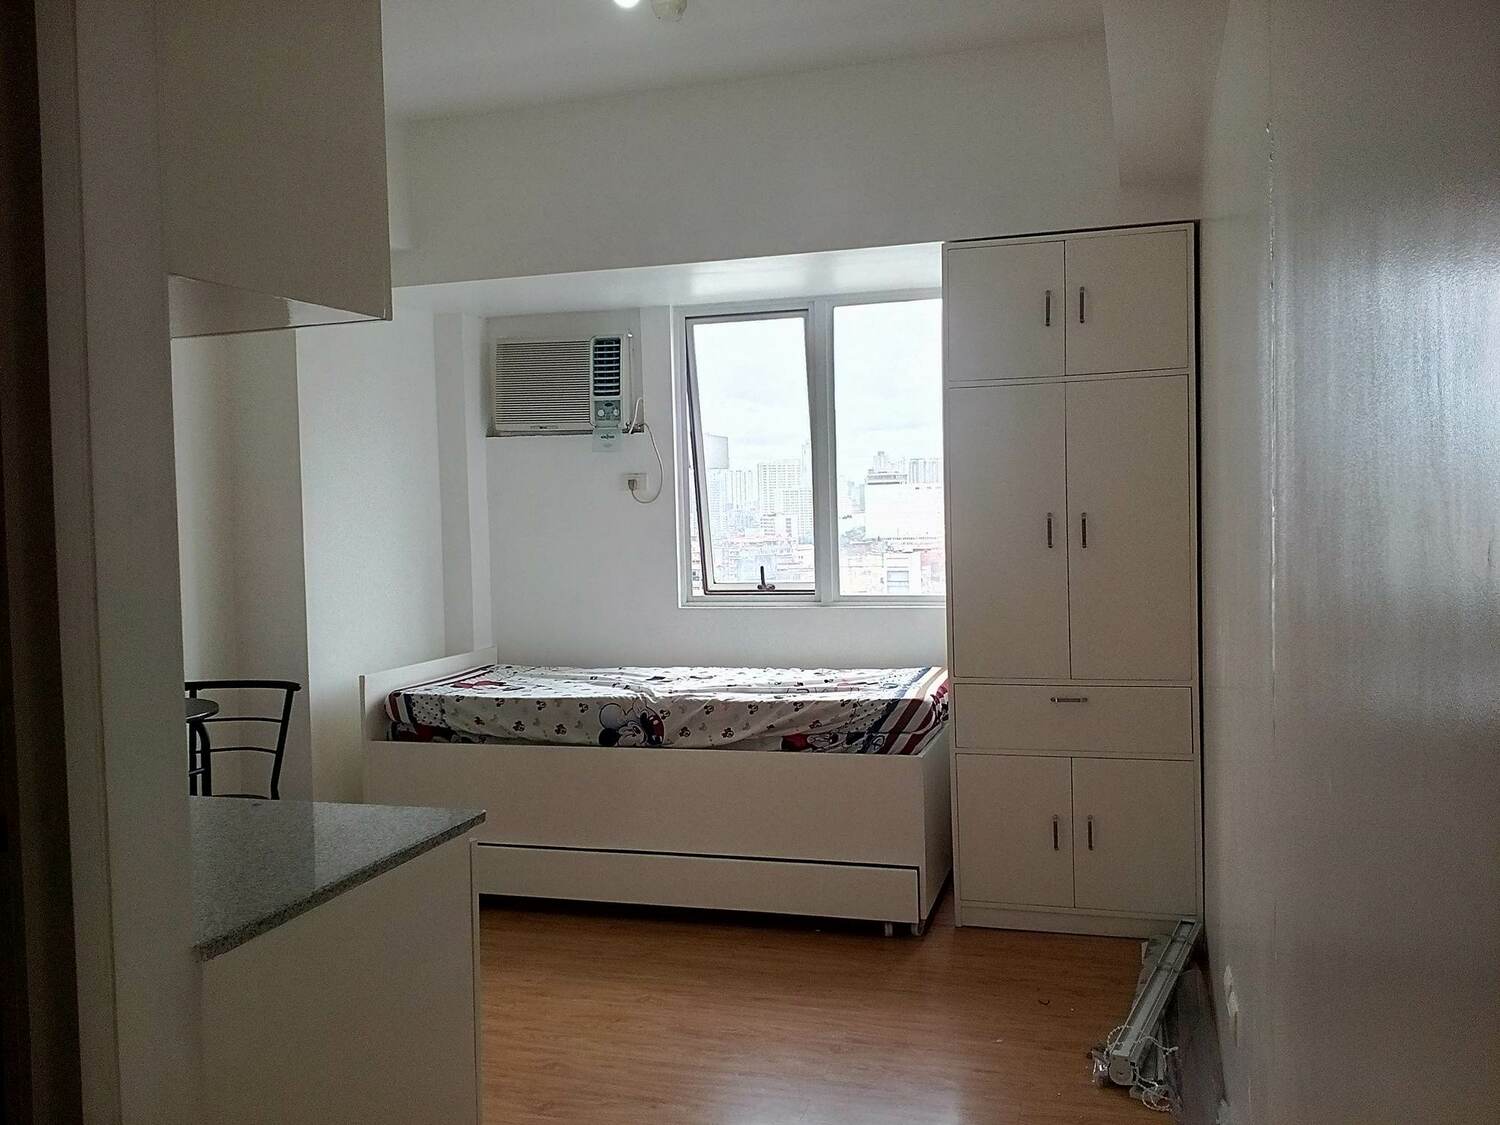 <span style="font-weight: bold;">Semi-Furnished studio unit good for two(2) only&nbsp;</span><br>